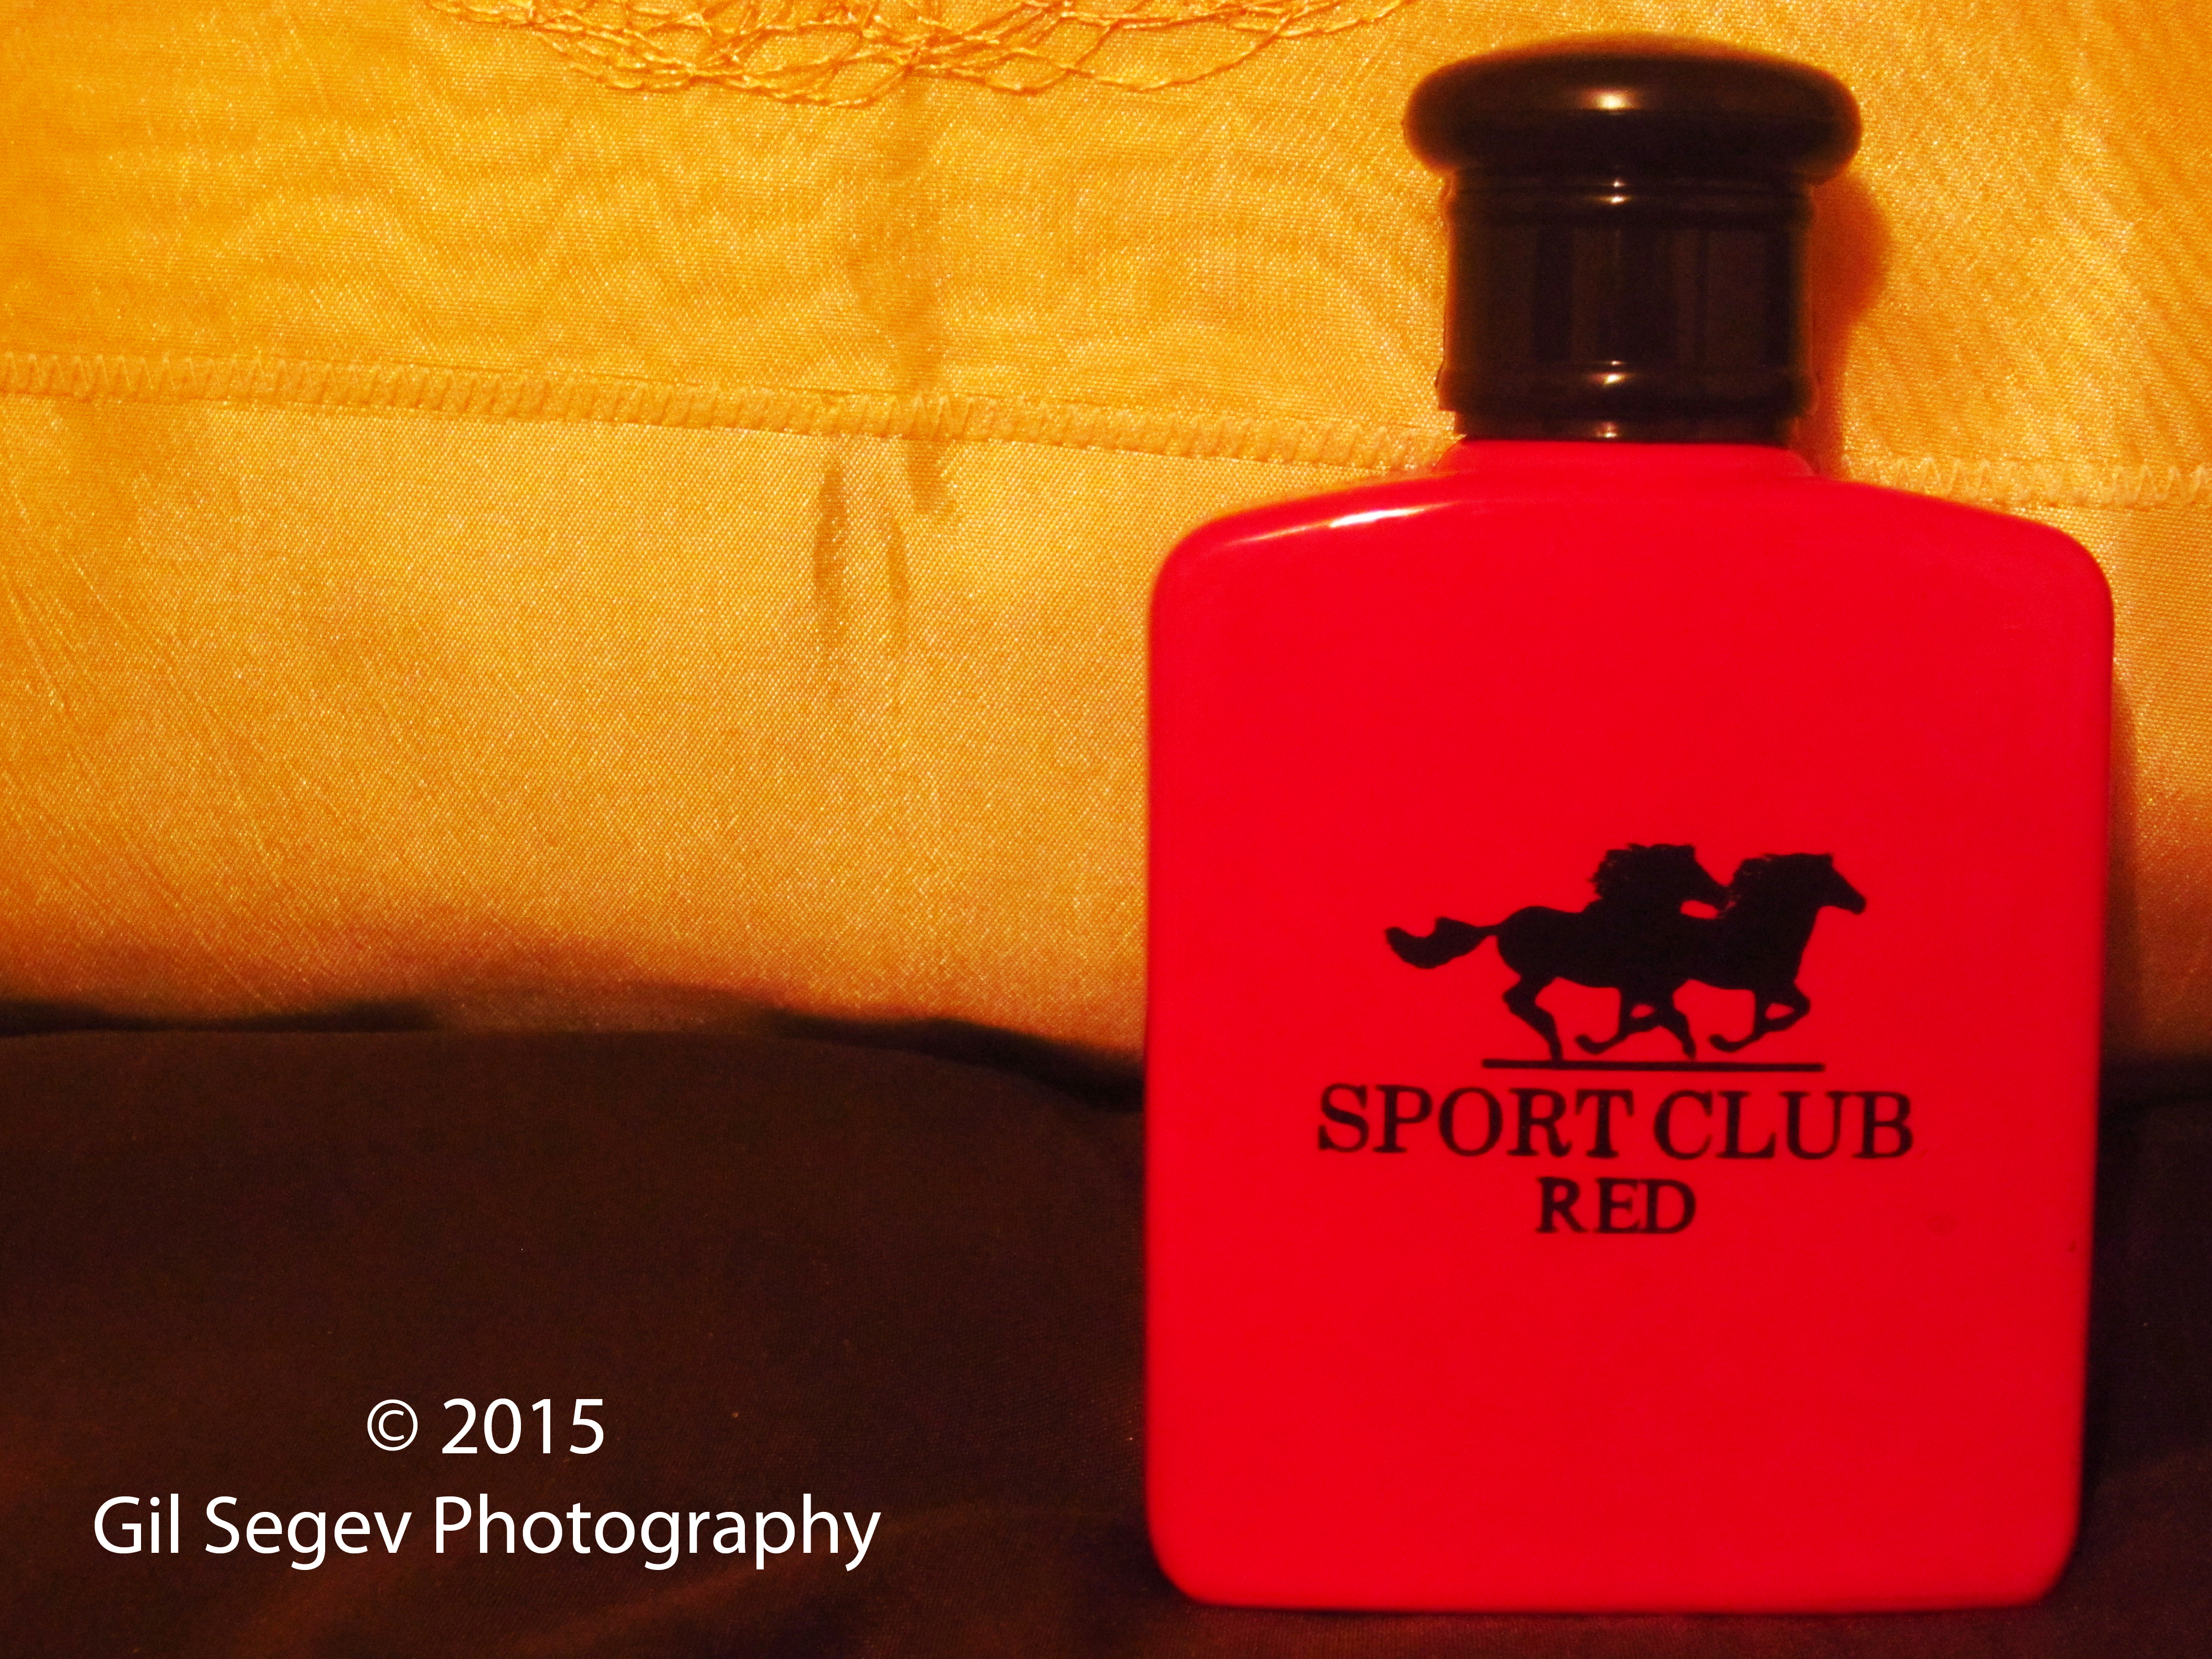 Cologne Review: SPORT CLUB RED by 